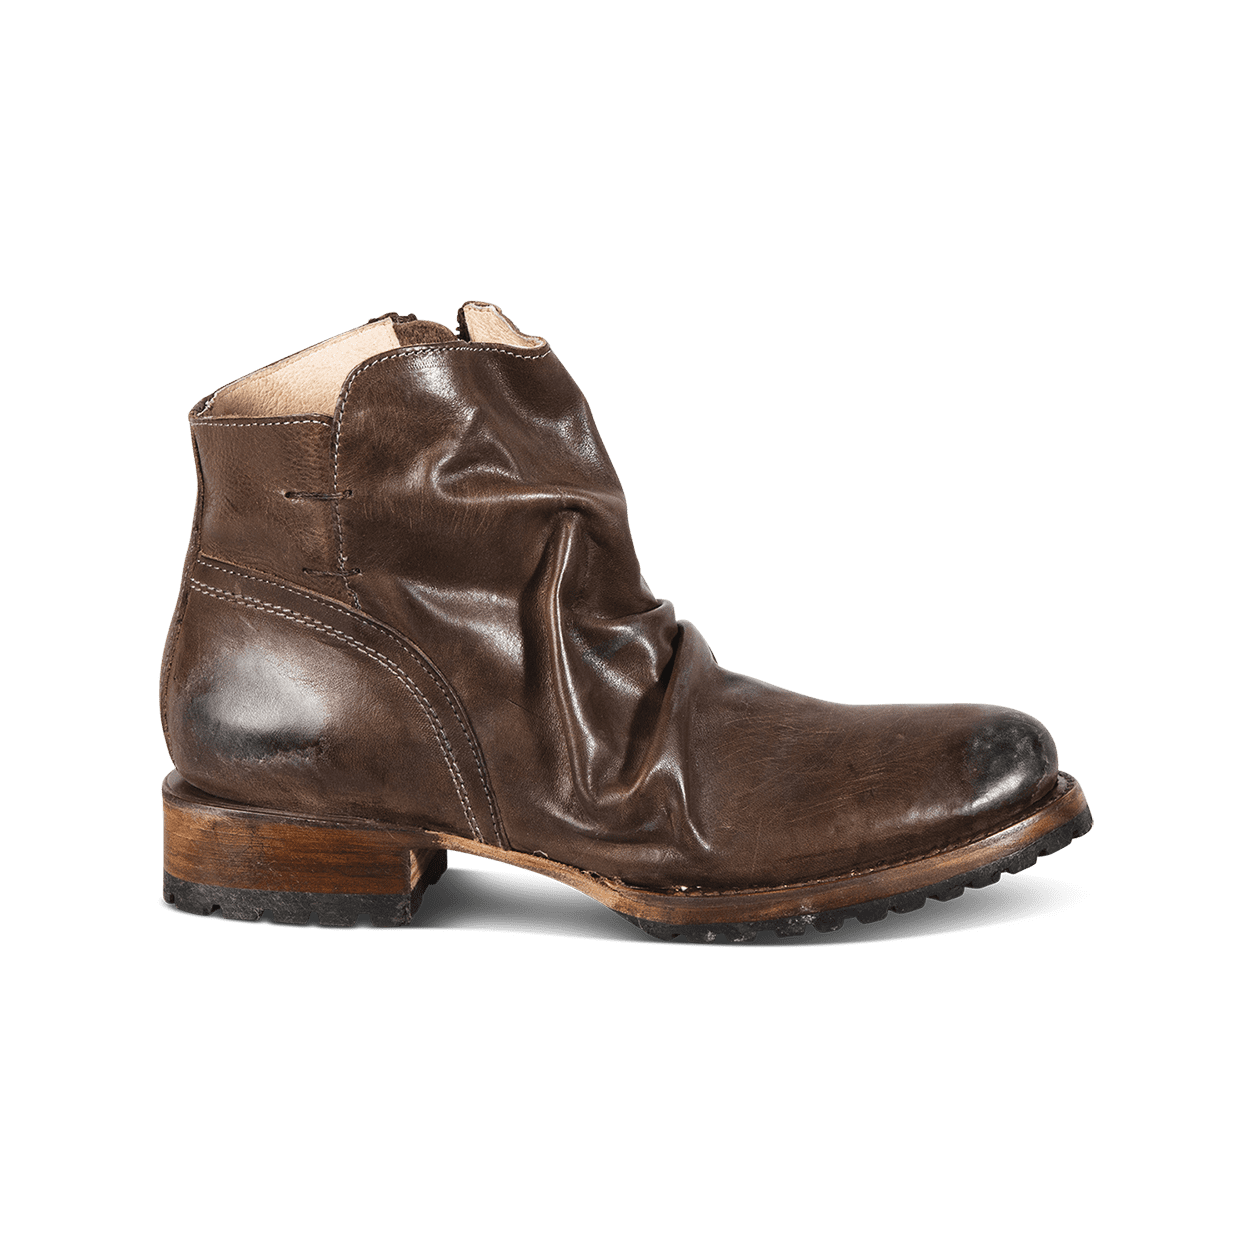 FREEBIRD men's Beck stone inside zip and a gathered leather silhouette 